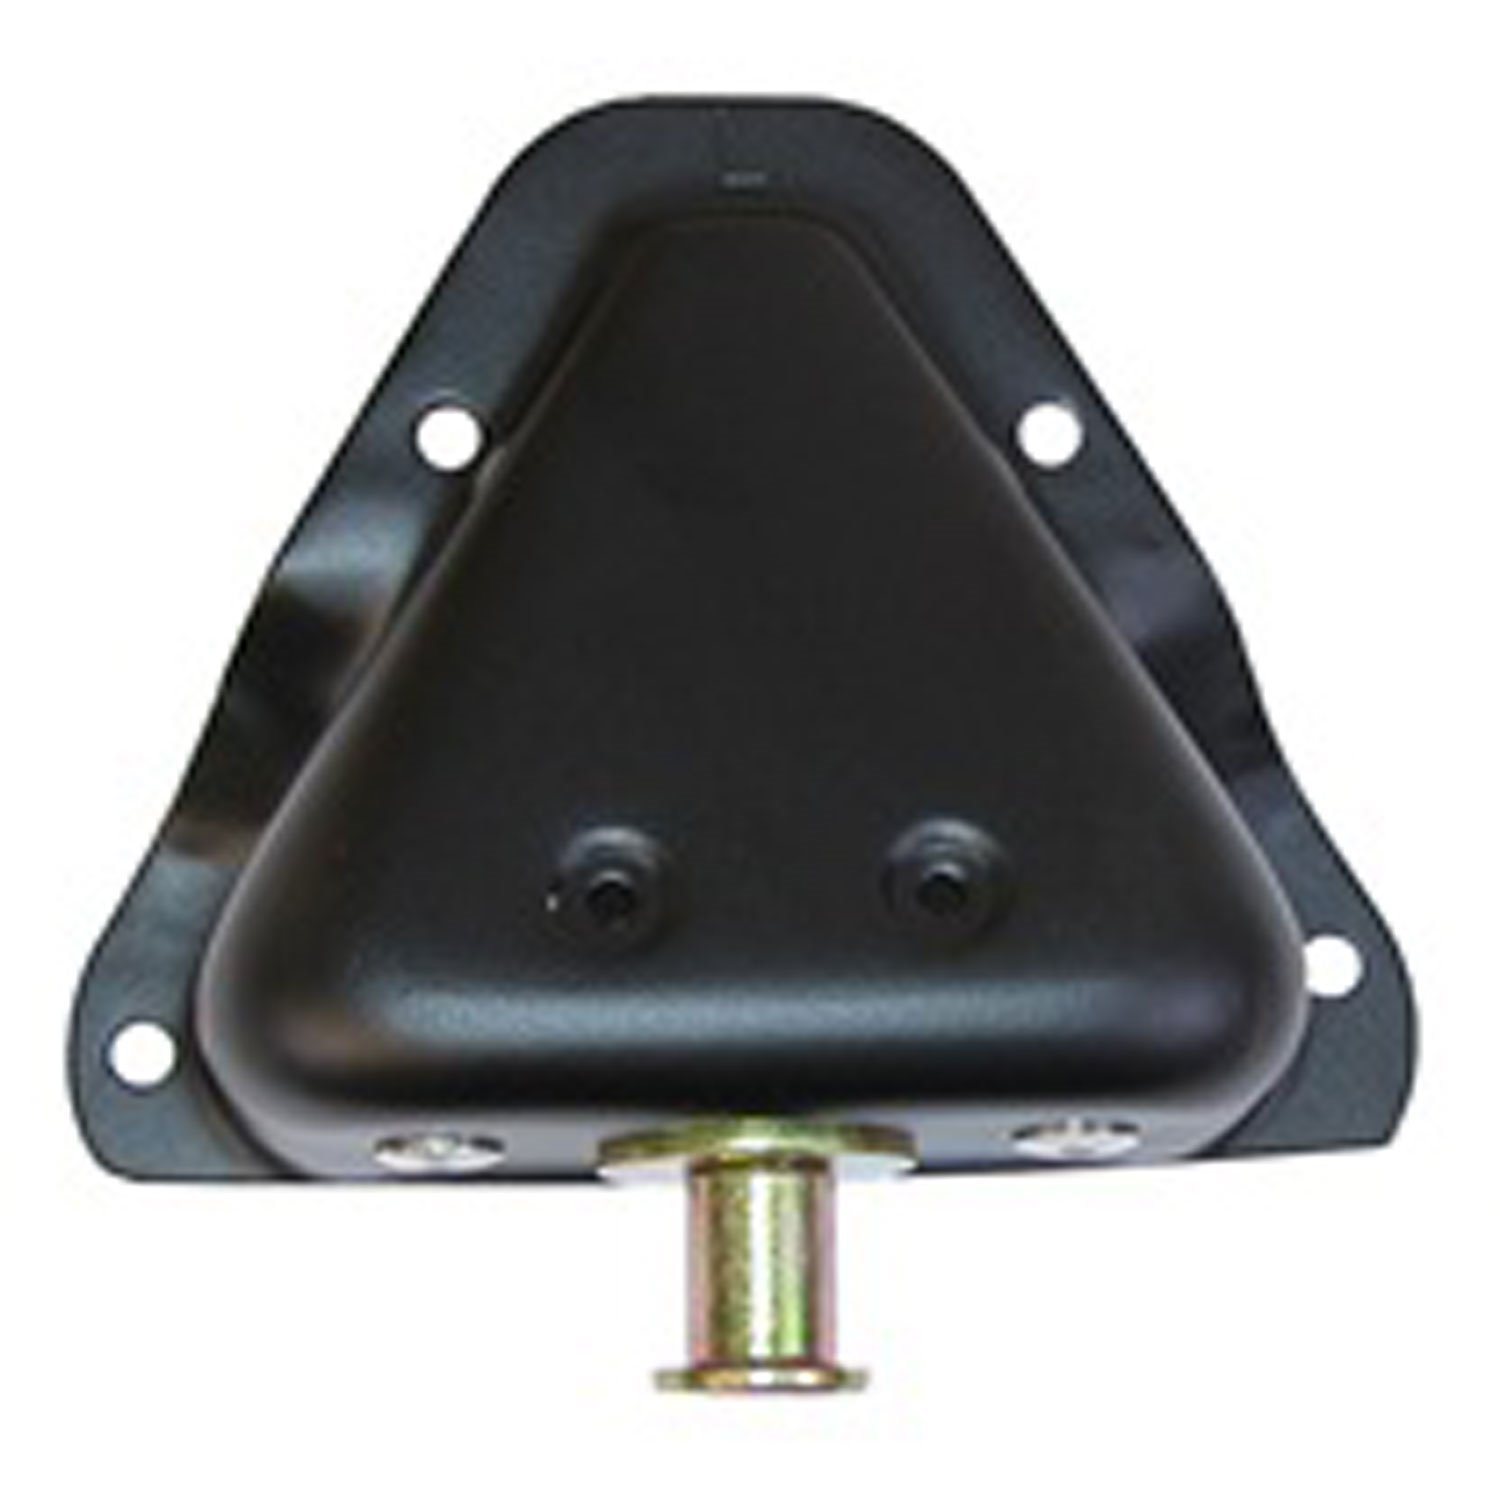 This door latch pin and bracket from Omix-ADA fits the left side of 81-86 Jeep CJ7/CJ8 and 87-95 Jeep Wrangler YJ.